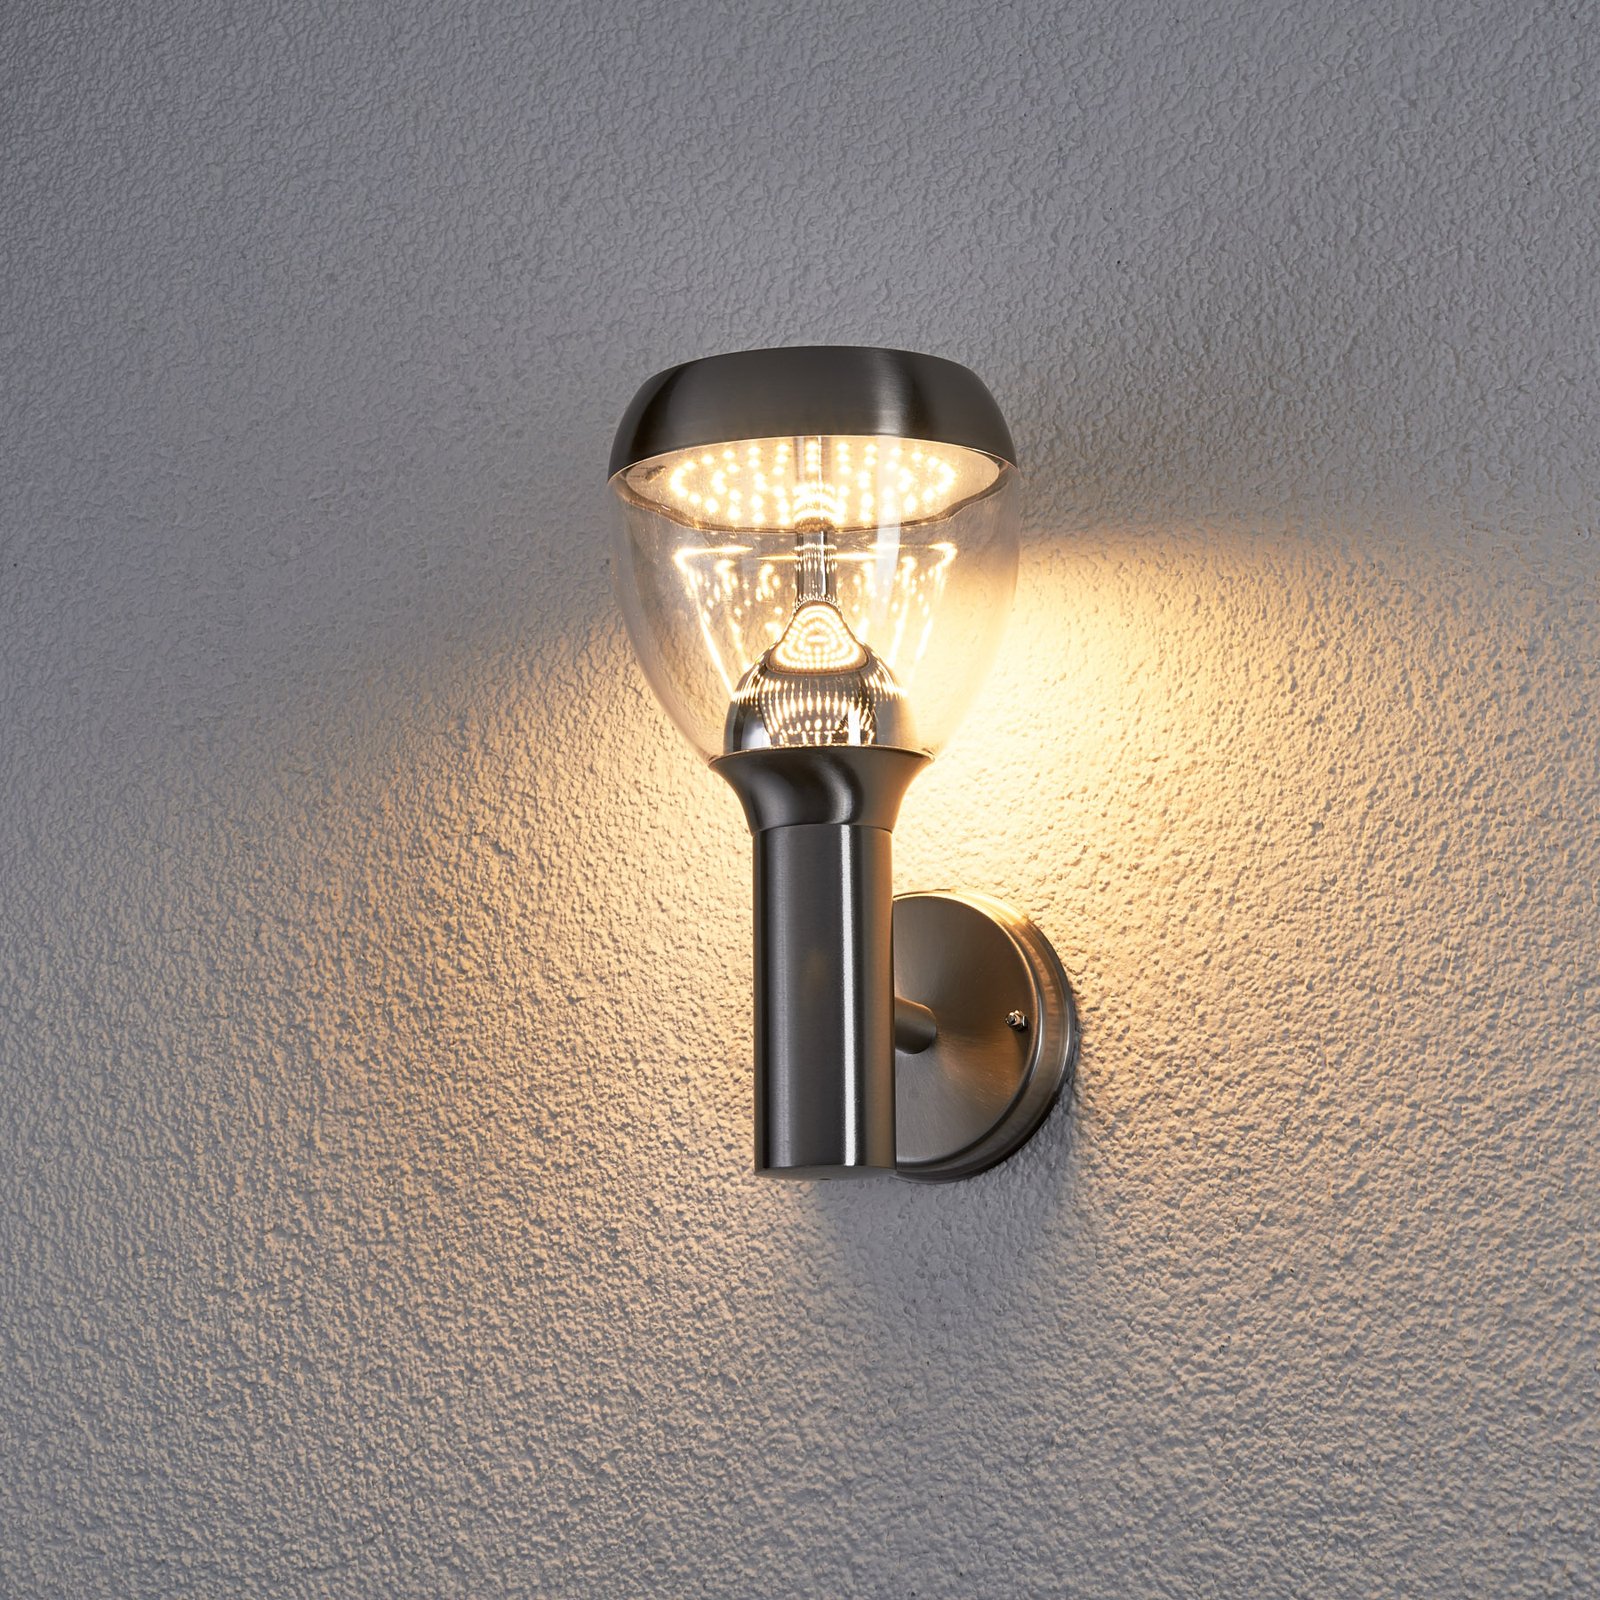 Etta LED outdoor wall light made of stainl. steel